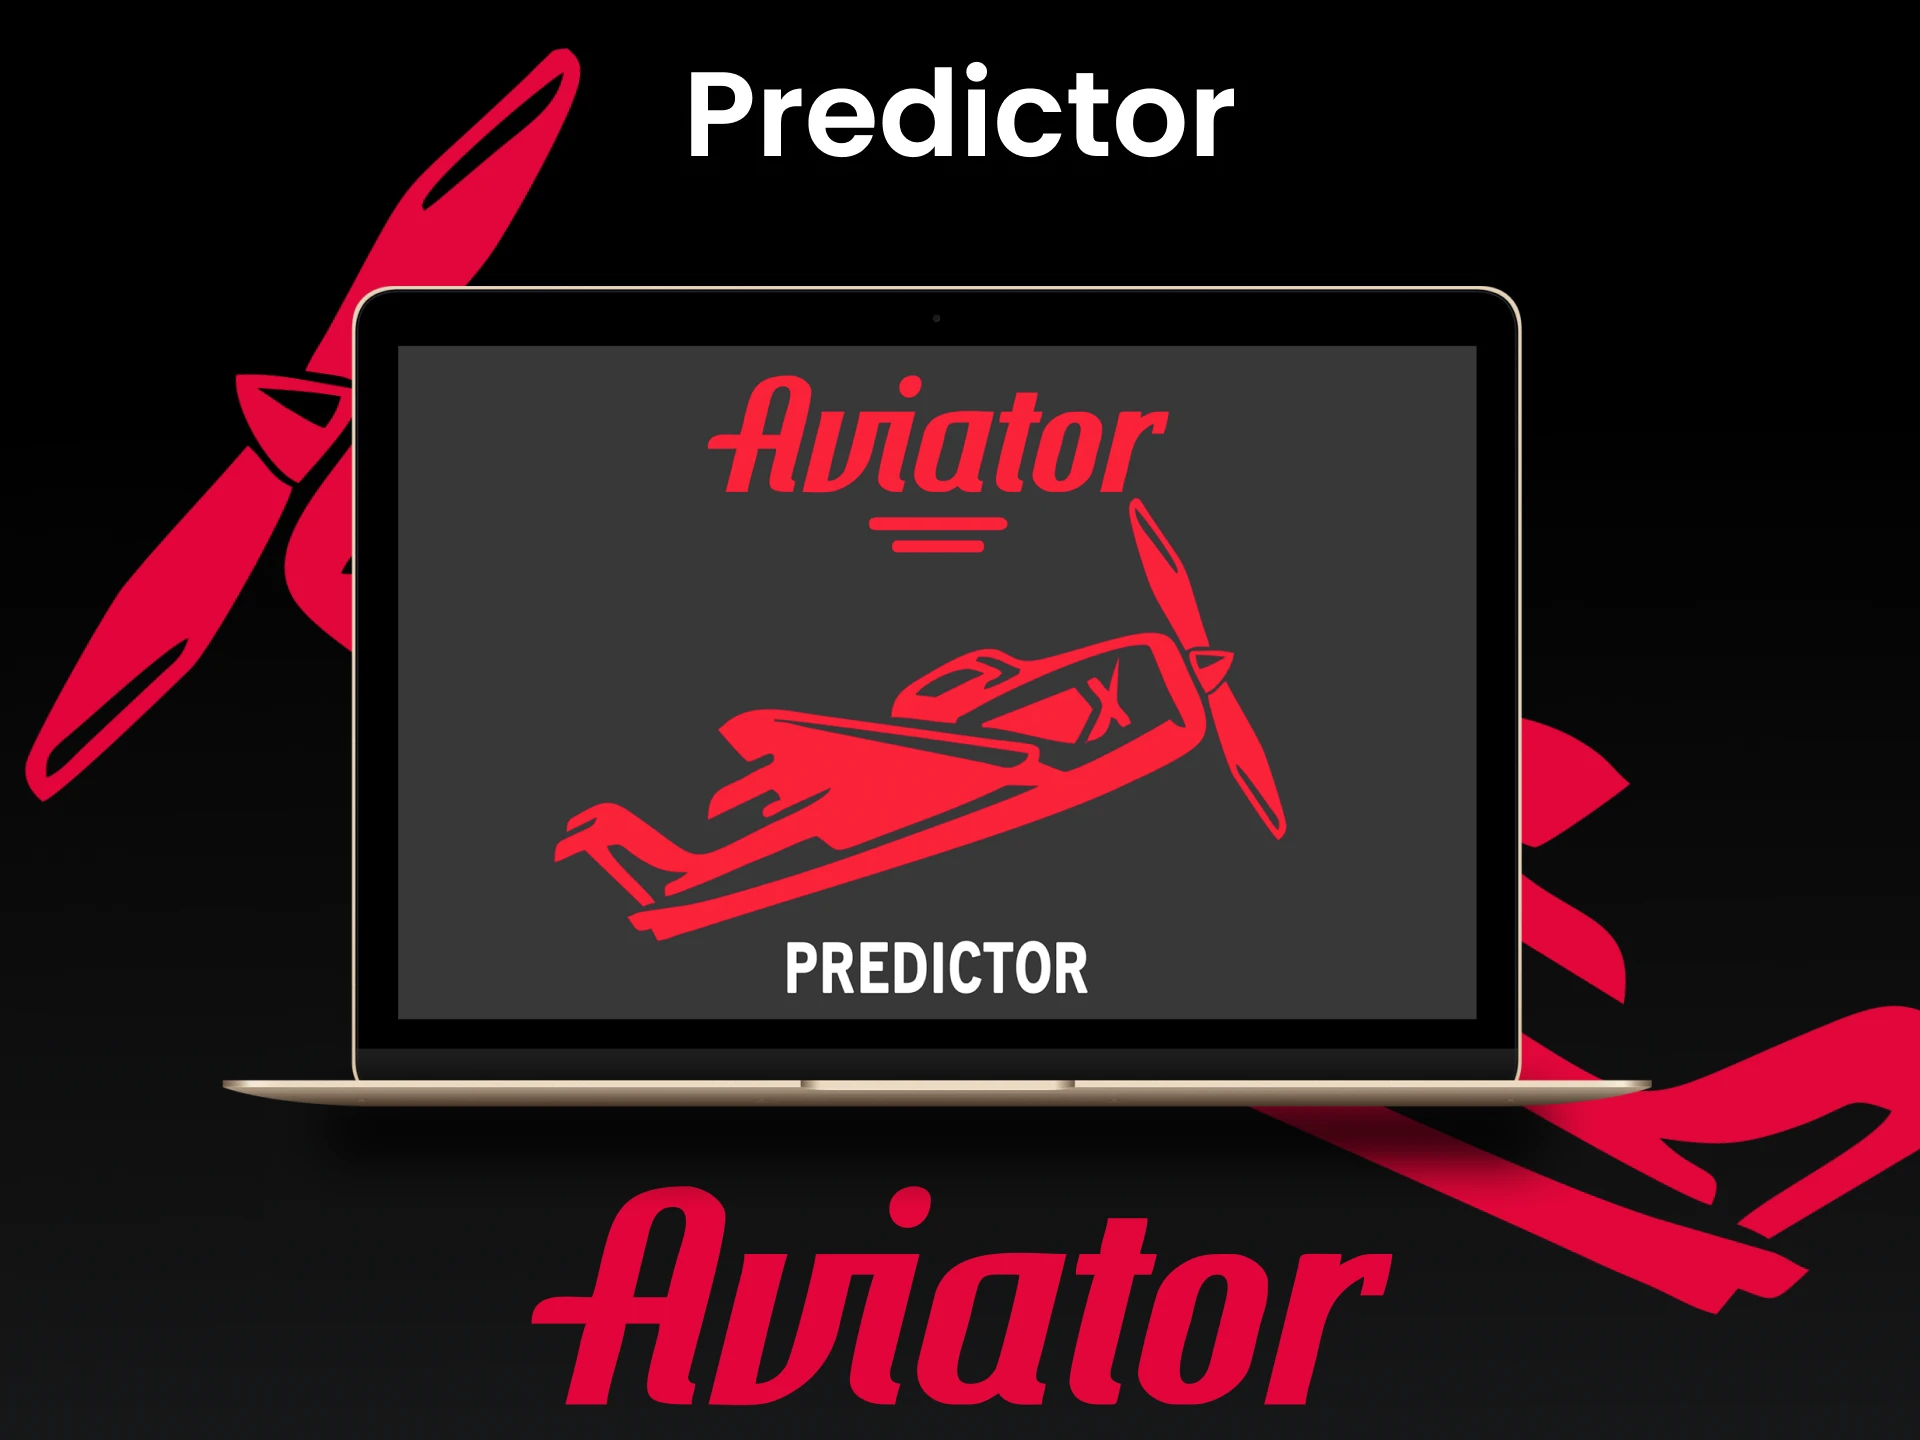 There is software predictor for playing Aviator game online.